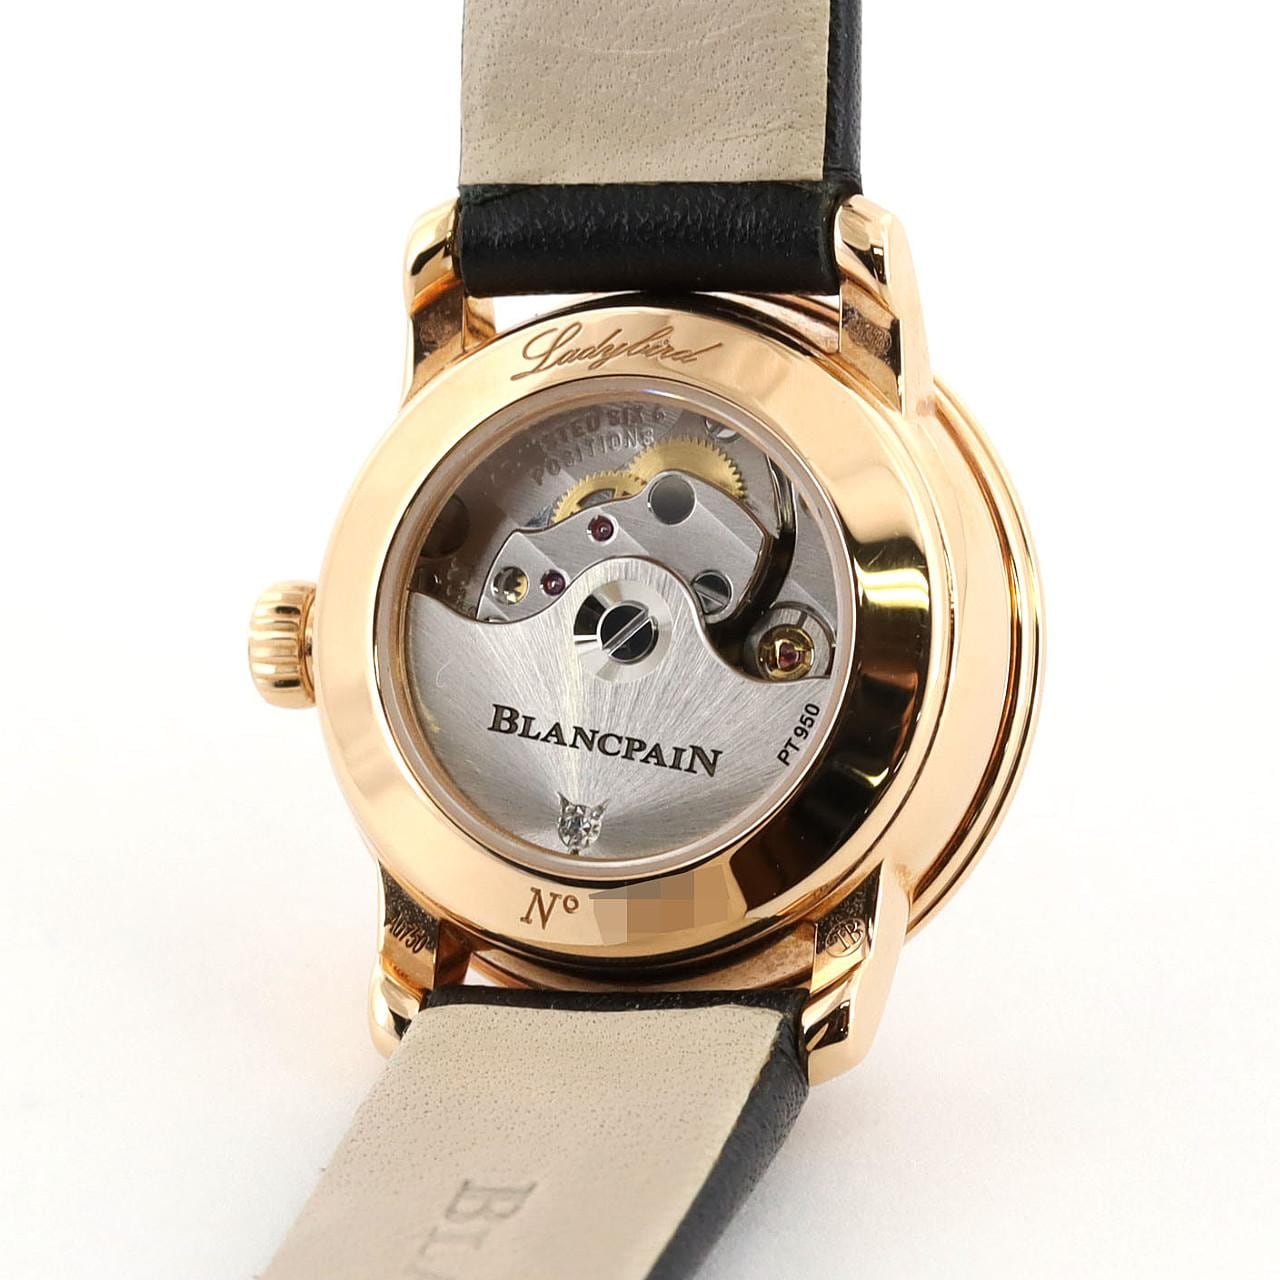 Blancpain Ladybird PG/D･8P LIMITED PG･RG Automatic